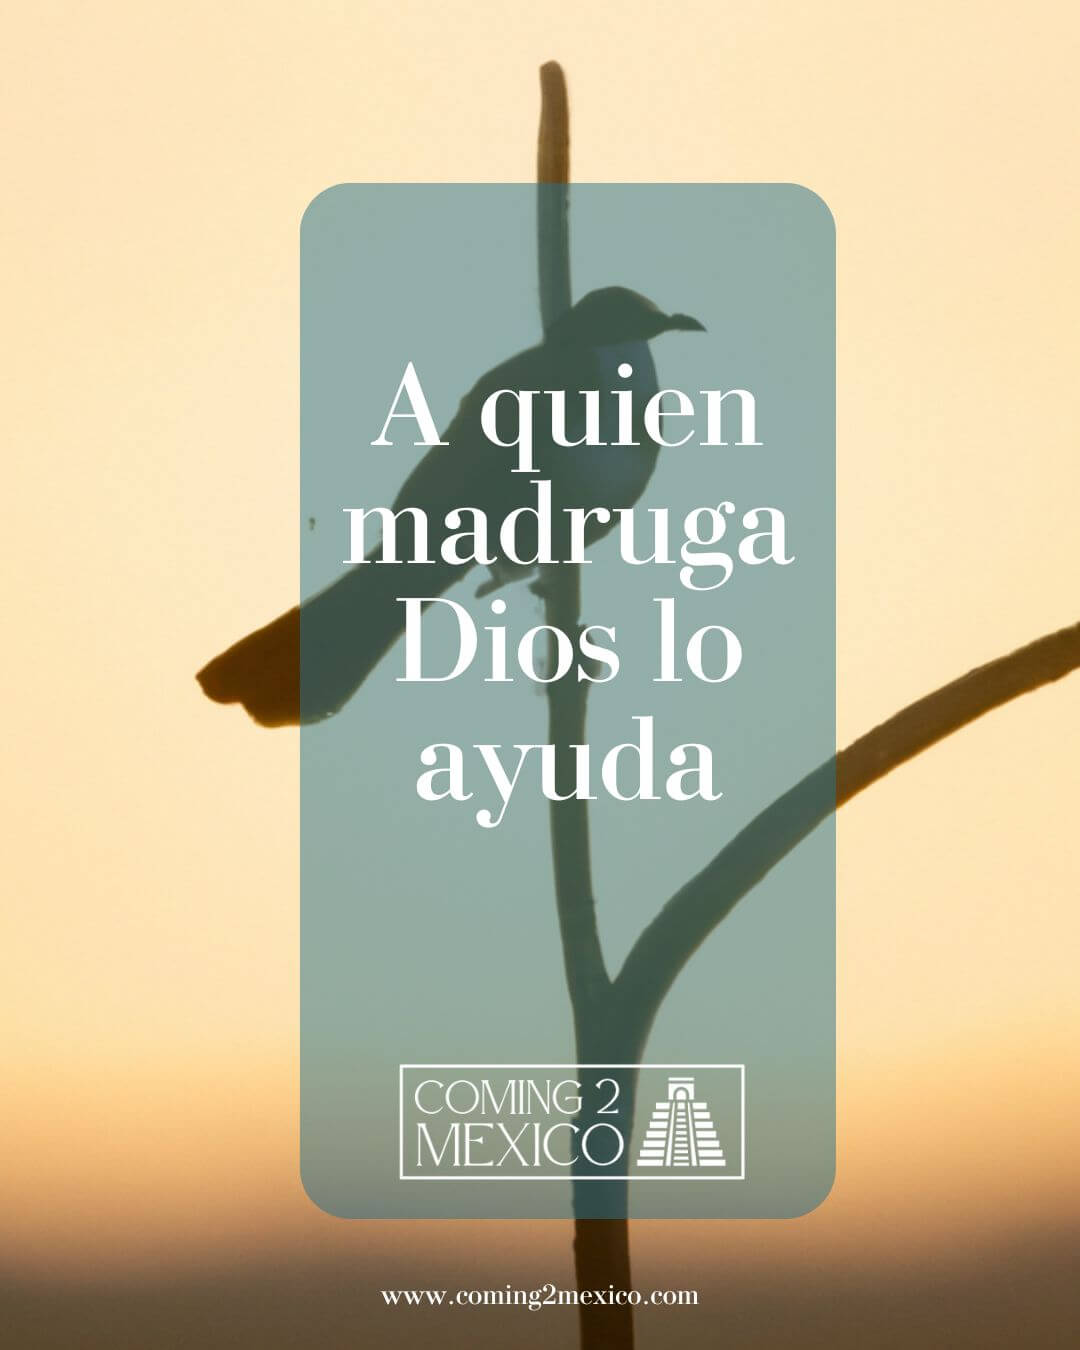 A quien madruga Dios lo ayuda - God helps the one who wakes up early